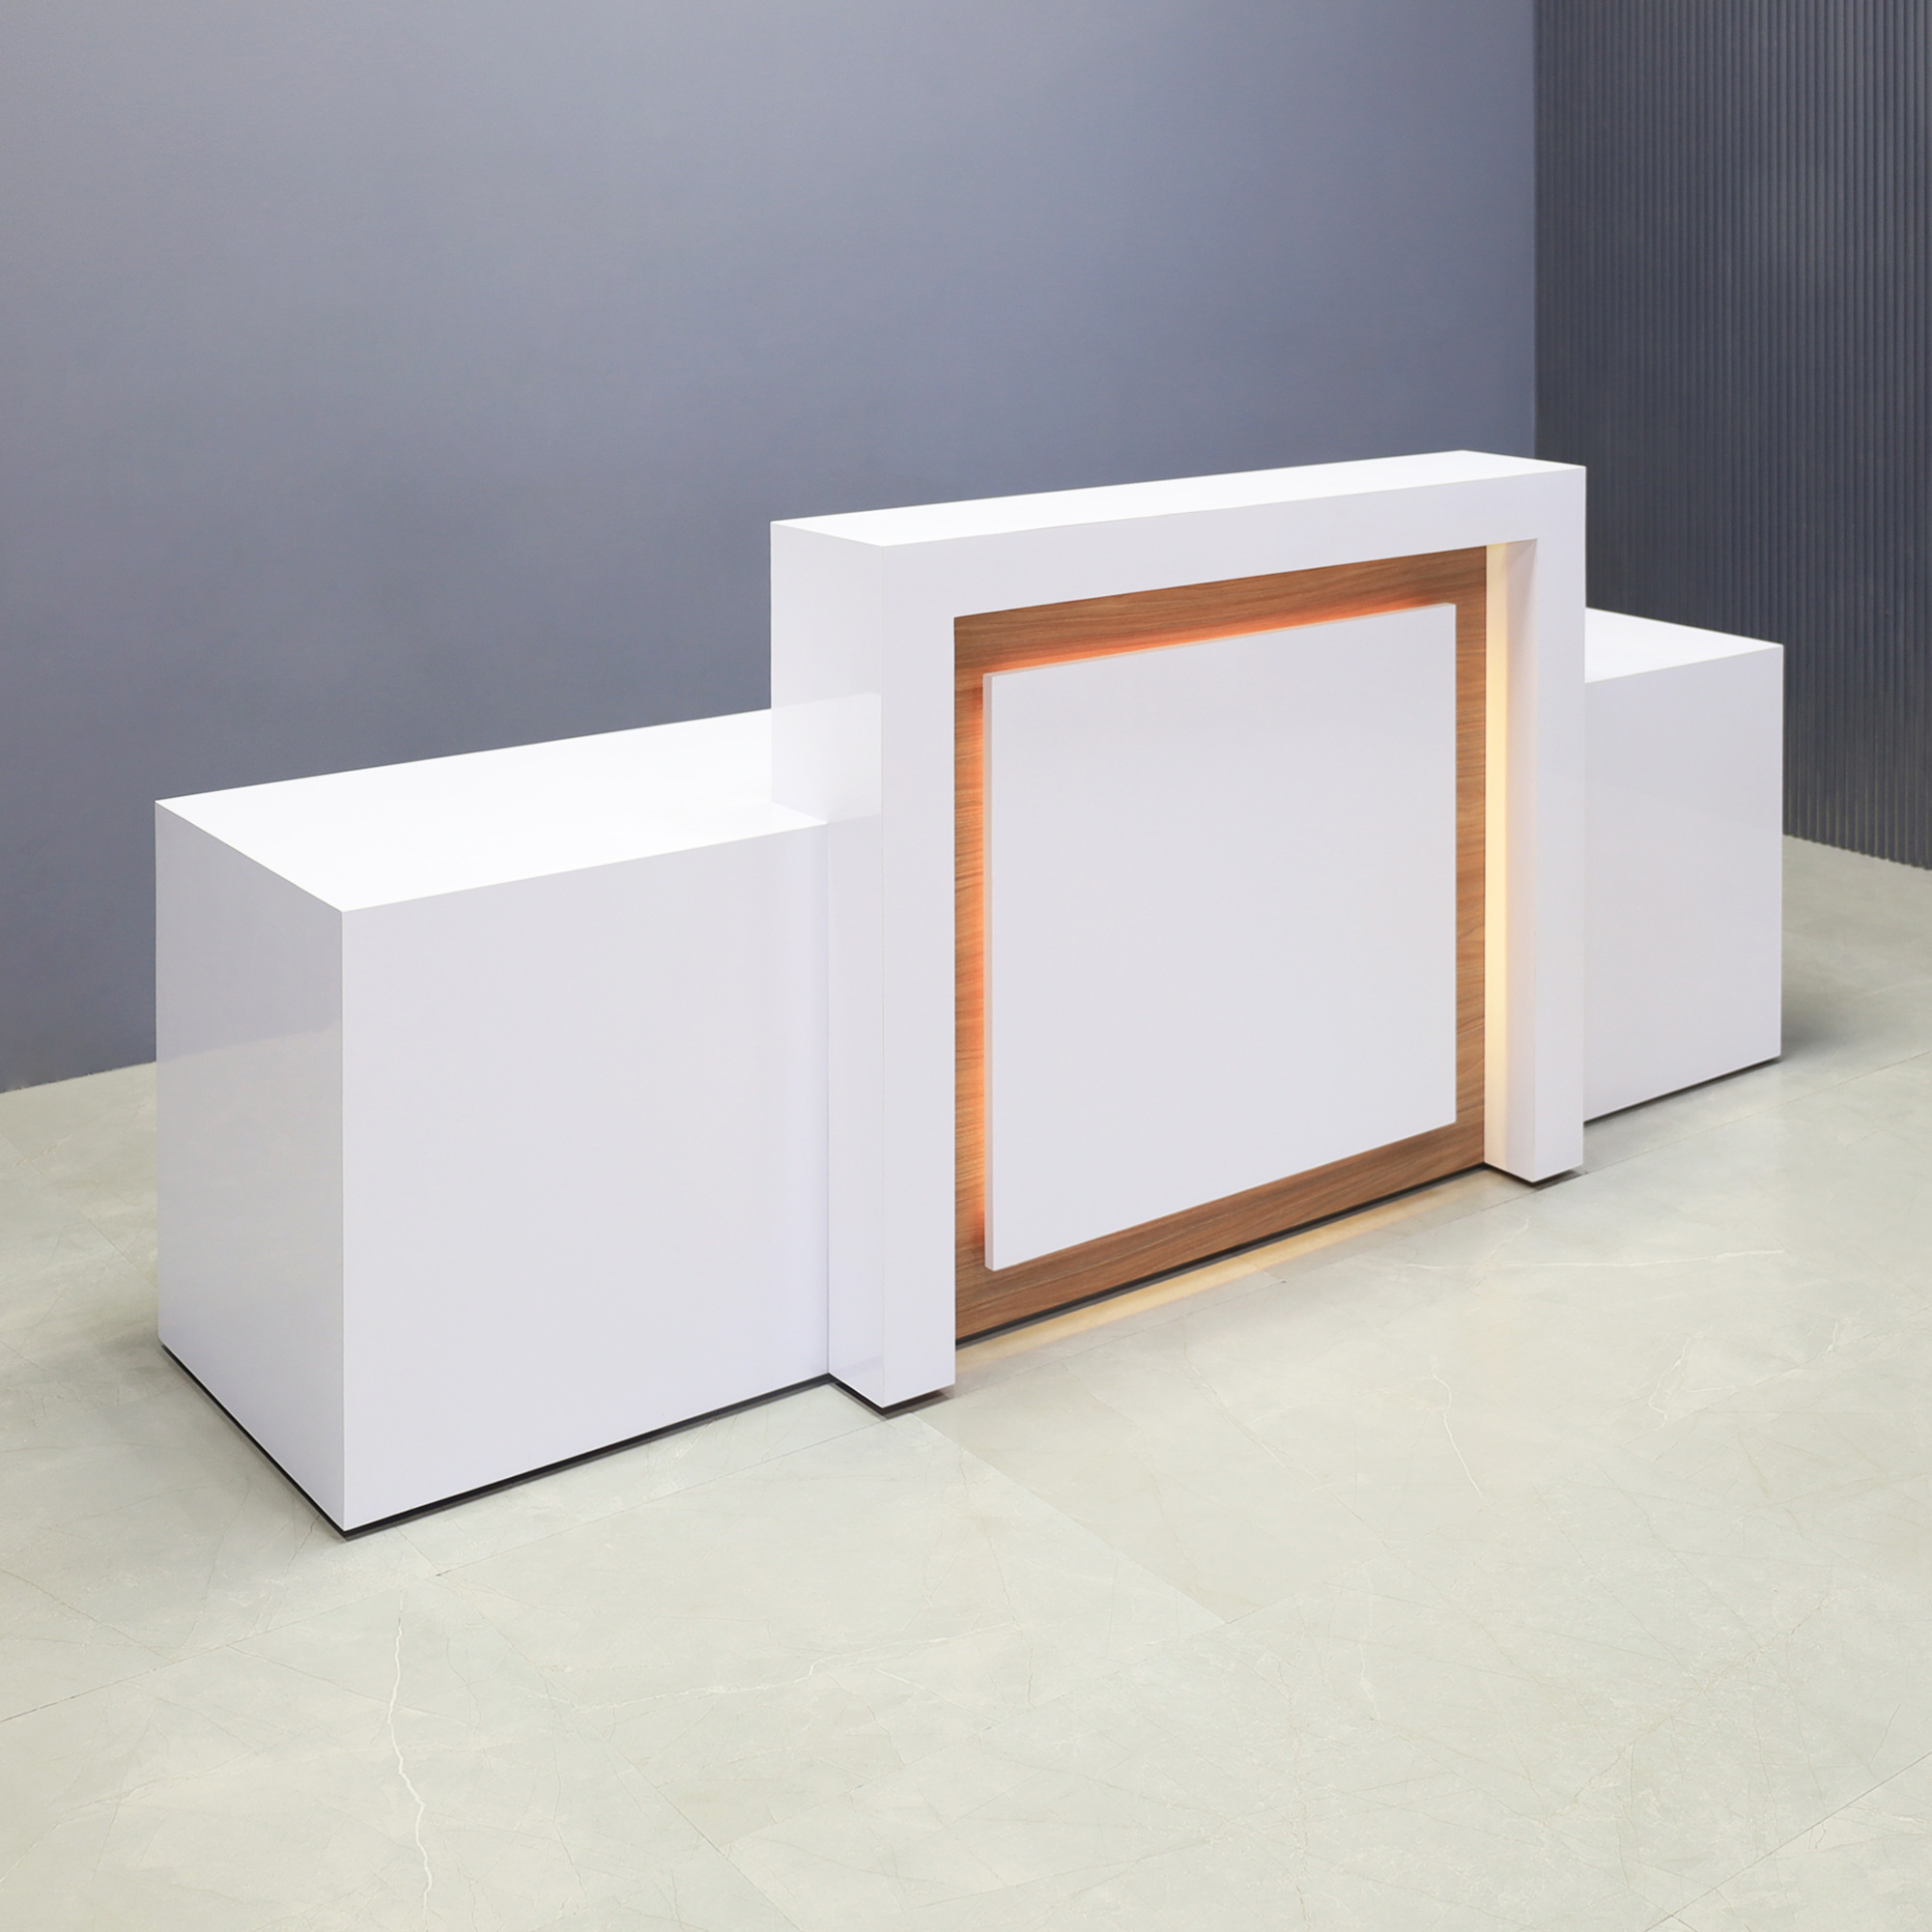 96-inch New York Extra Wide Reception Desk in white gloss laminate main desk and uptown walnut recess accent, with color LED, shown here.